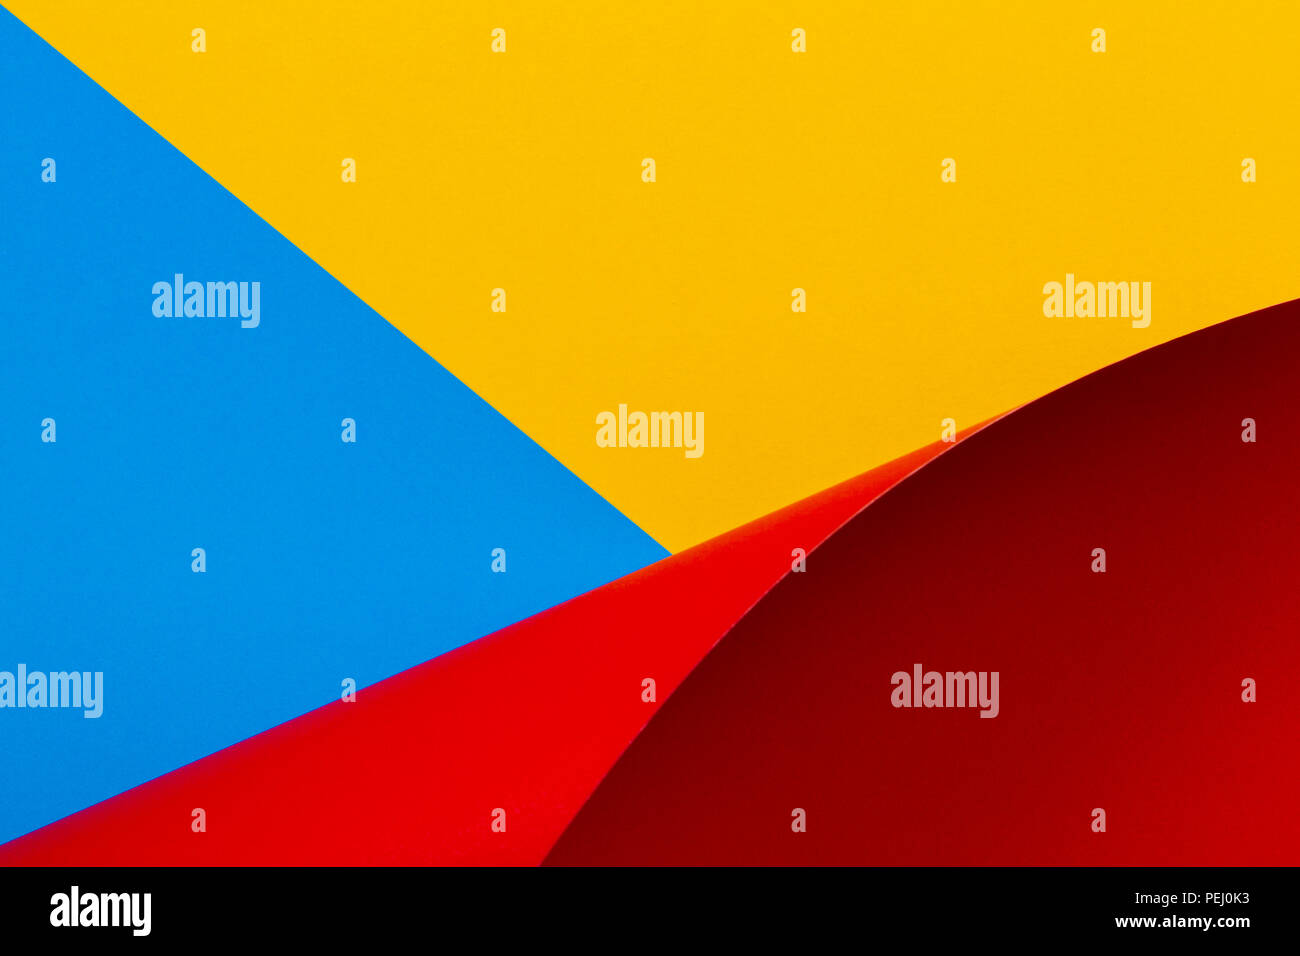 Abstract colorful background. Yellow blue red paper in geometric shapes Stock Photo